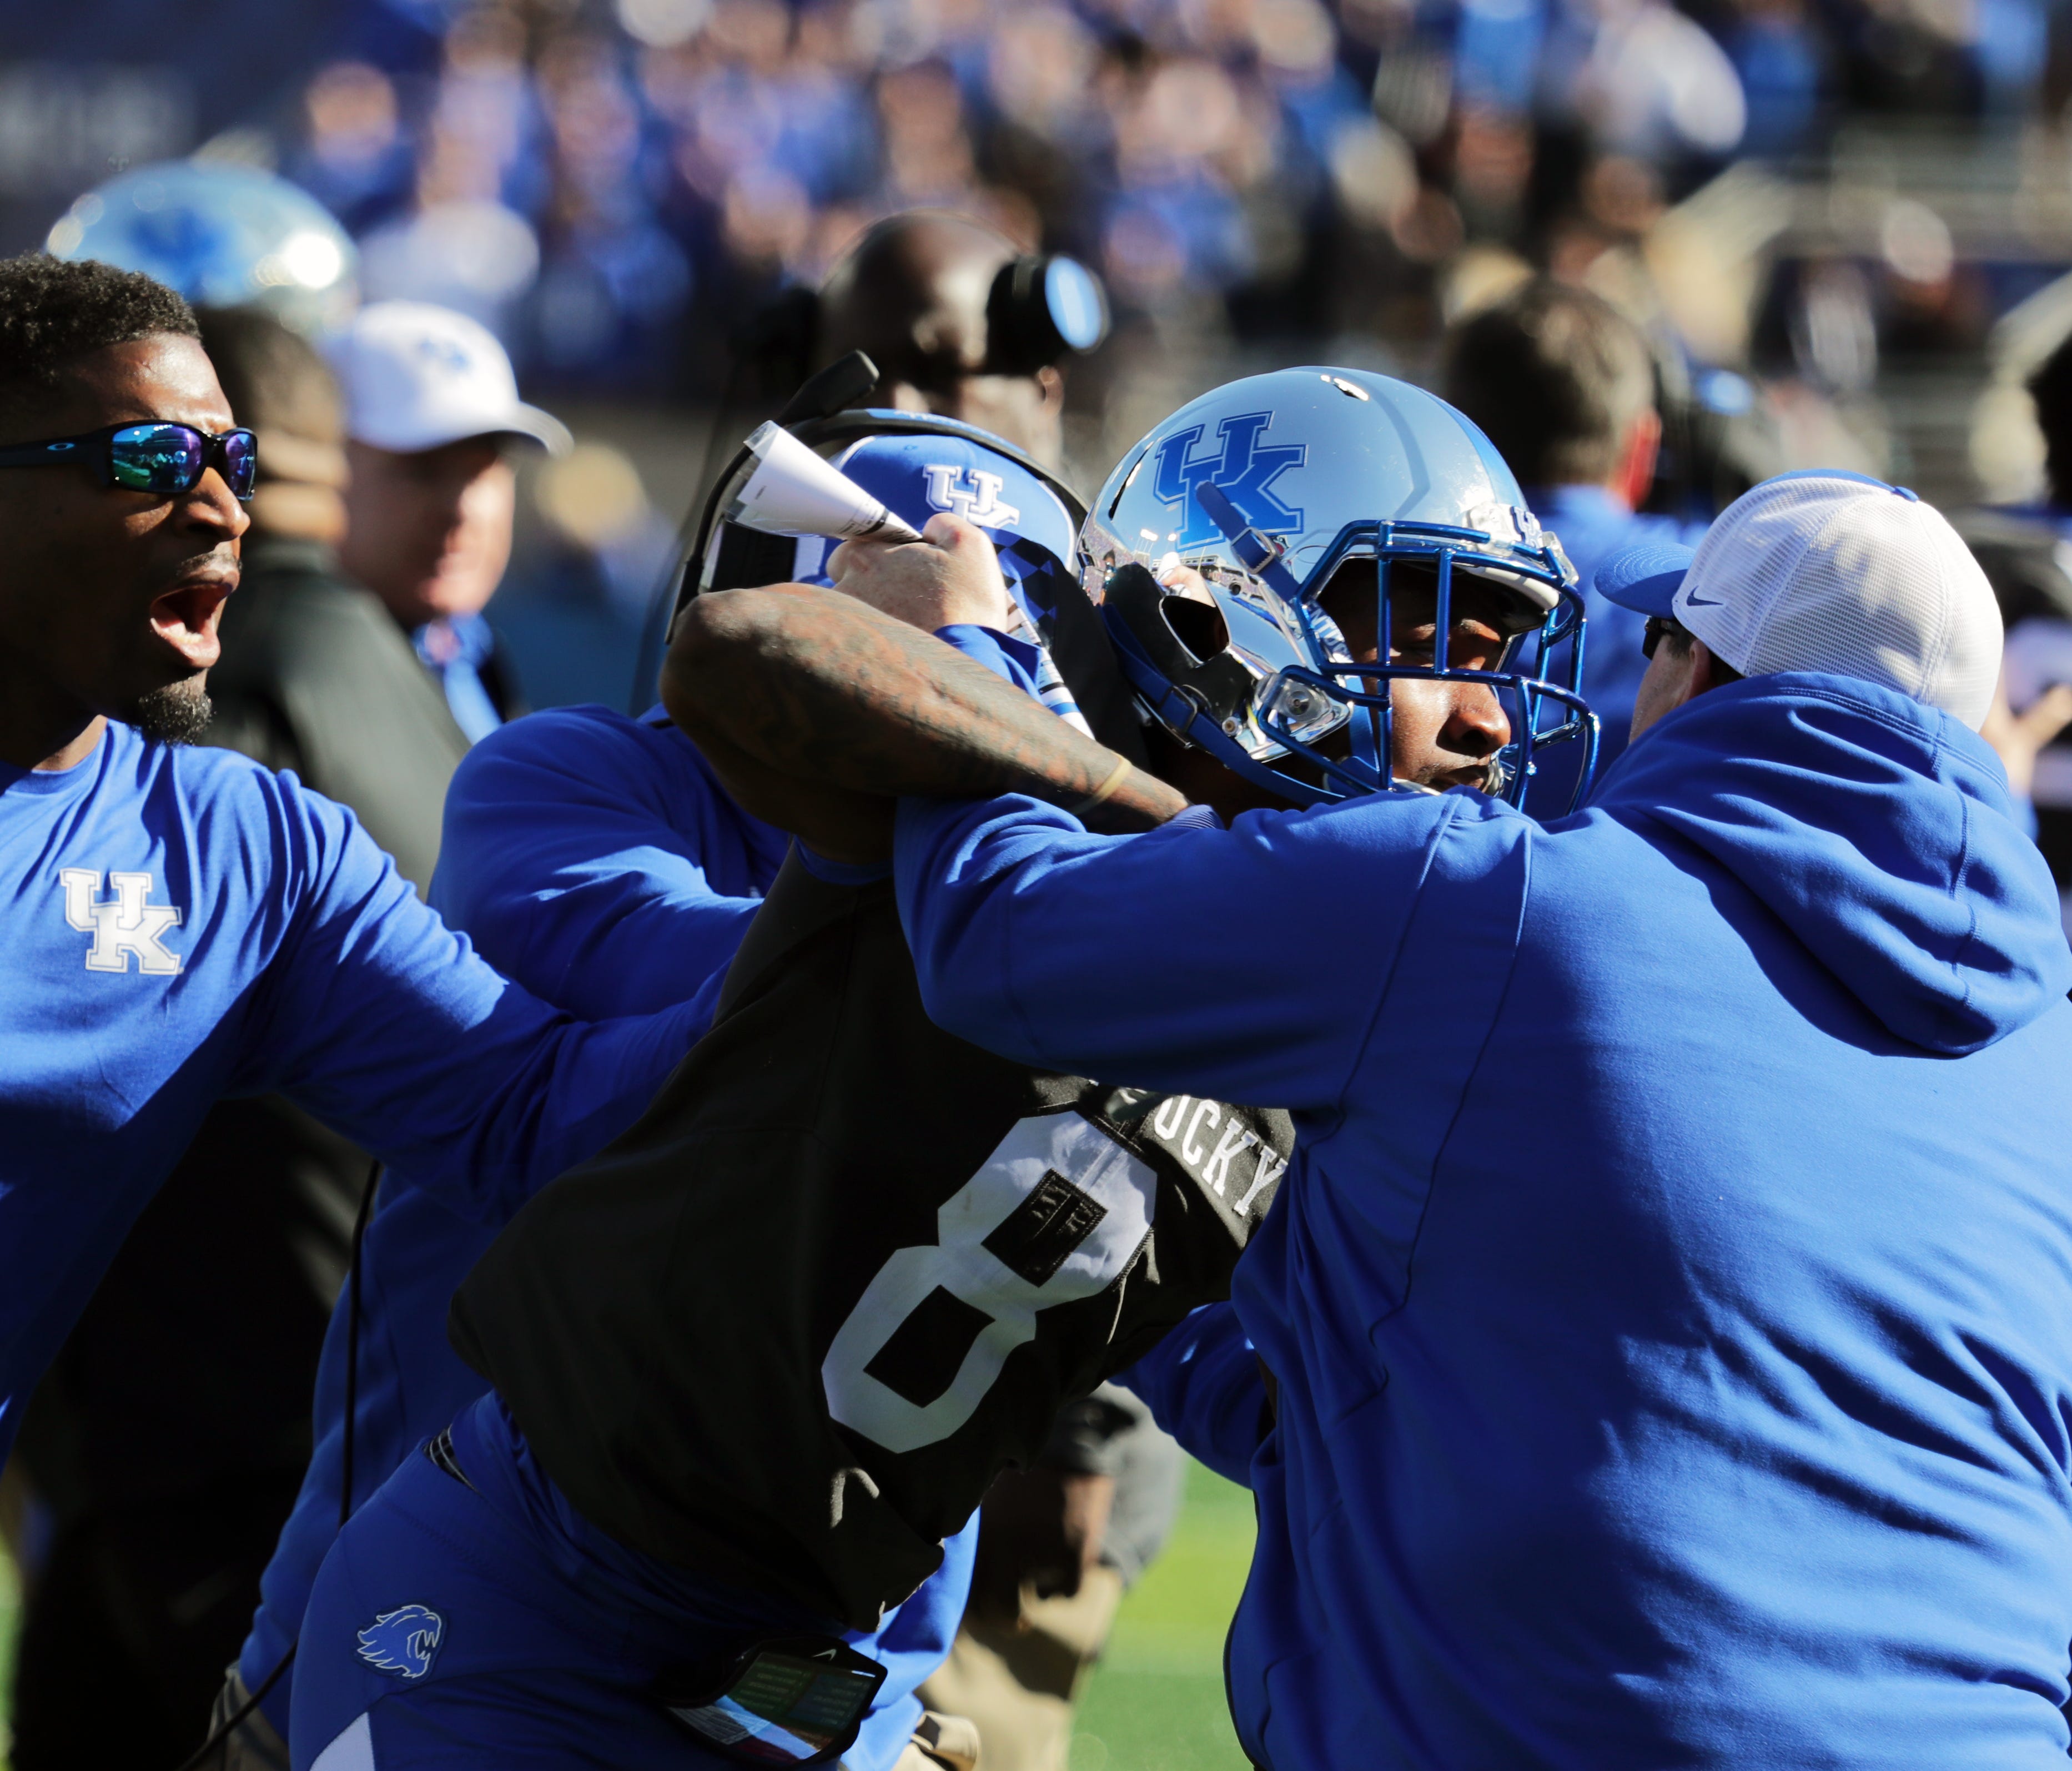 Kentucky's Derrick Baity Jr. had to be held back by his team after the scuffle.